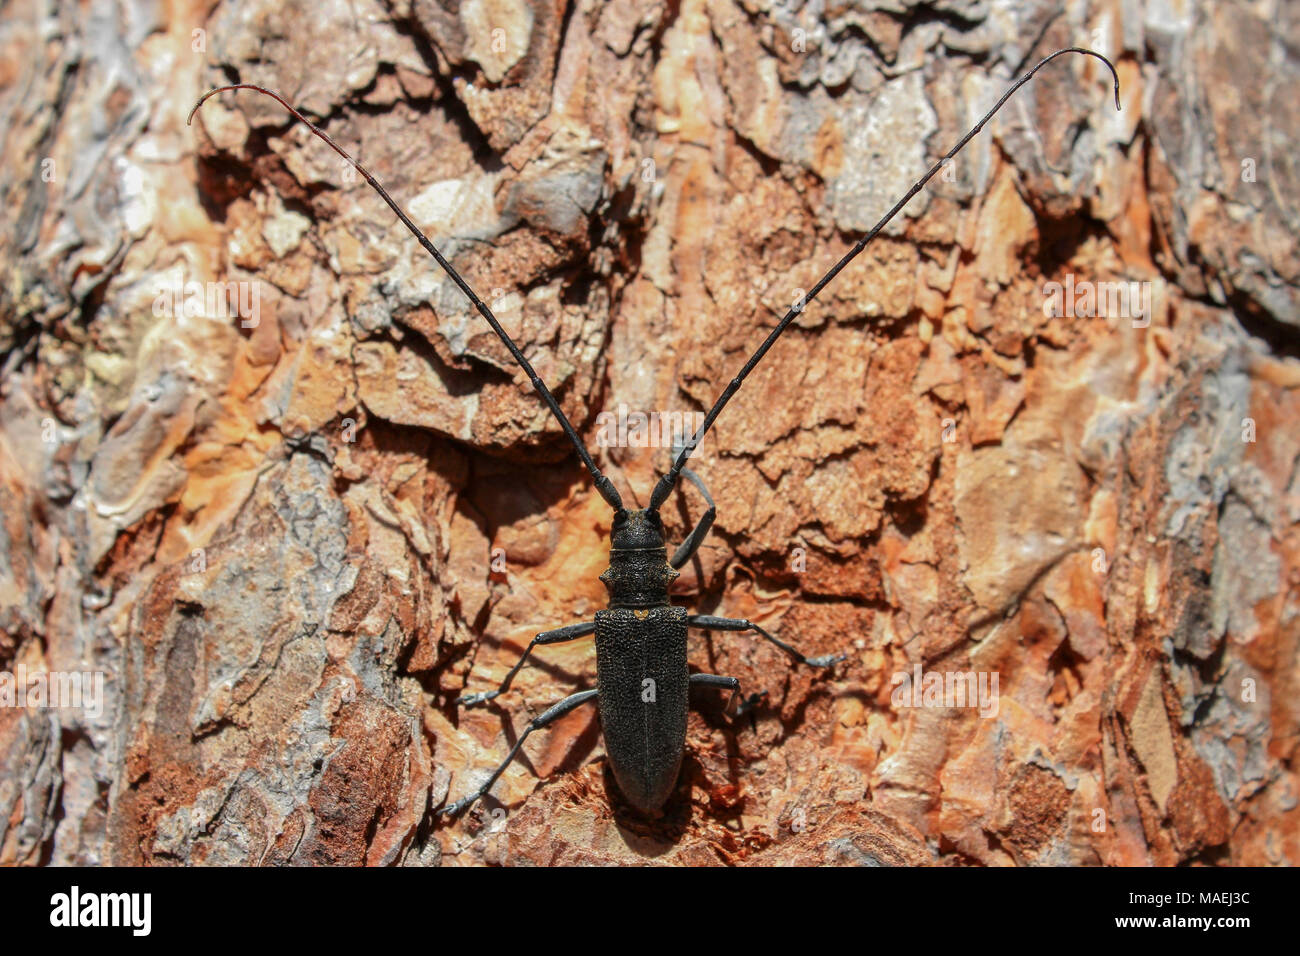 Monochamus sutor. Black beetle with a long mustache, sitting on the trunk of a pine. Stock Photo